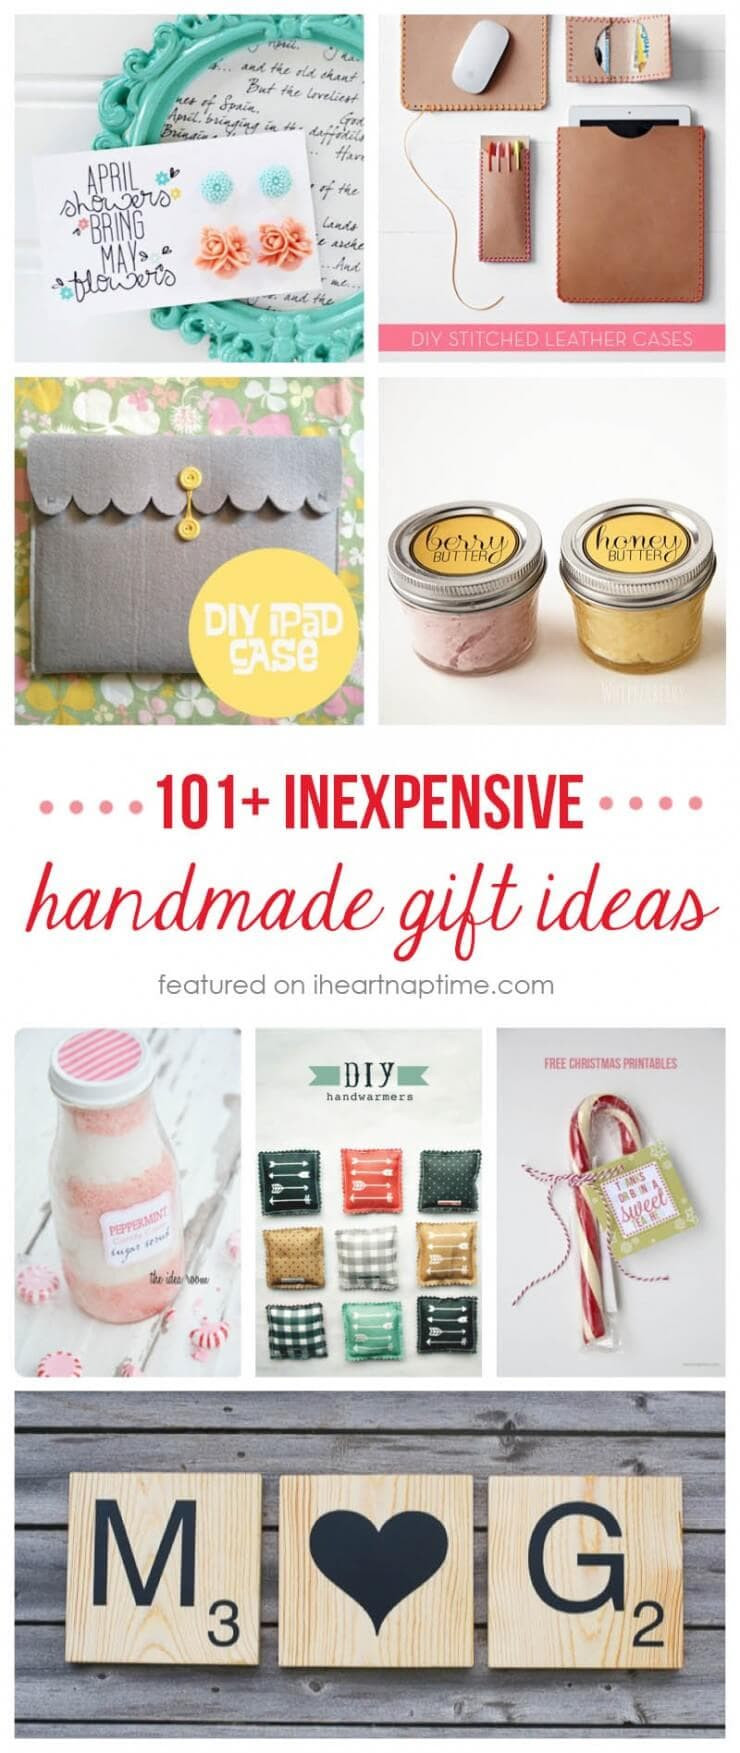 DIY Christmas Gift
 50 homemade t ideas to make for under $5 I Heart Nap Time